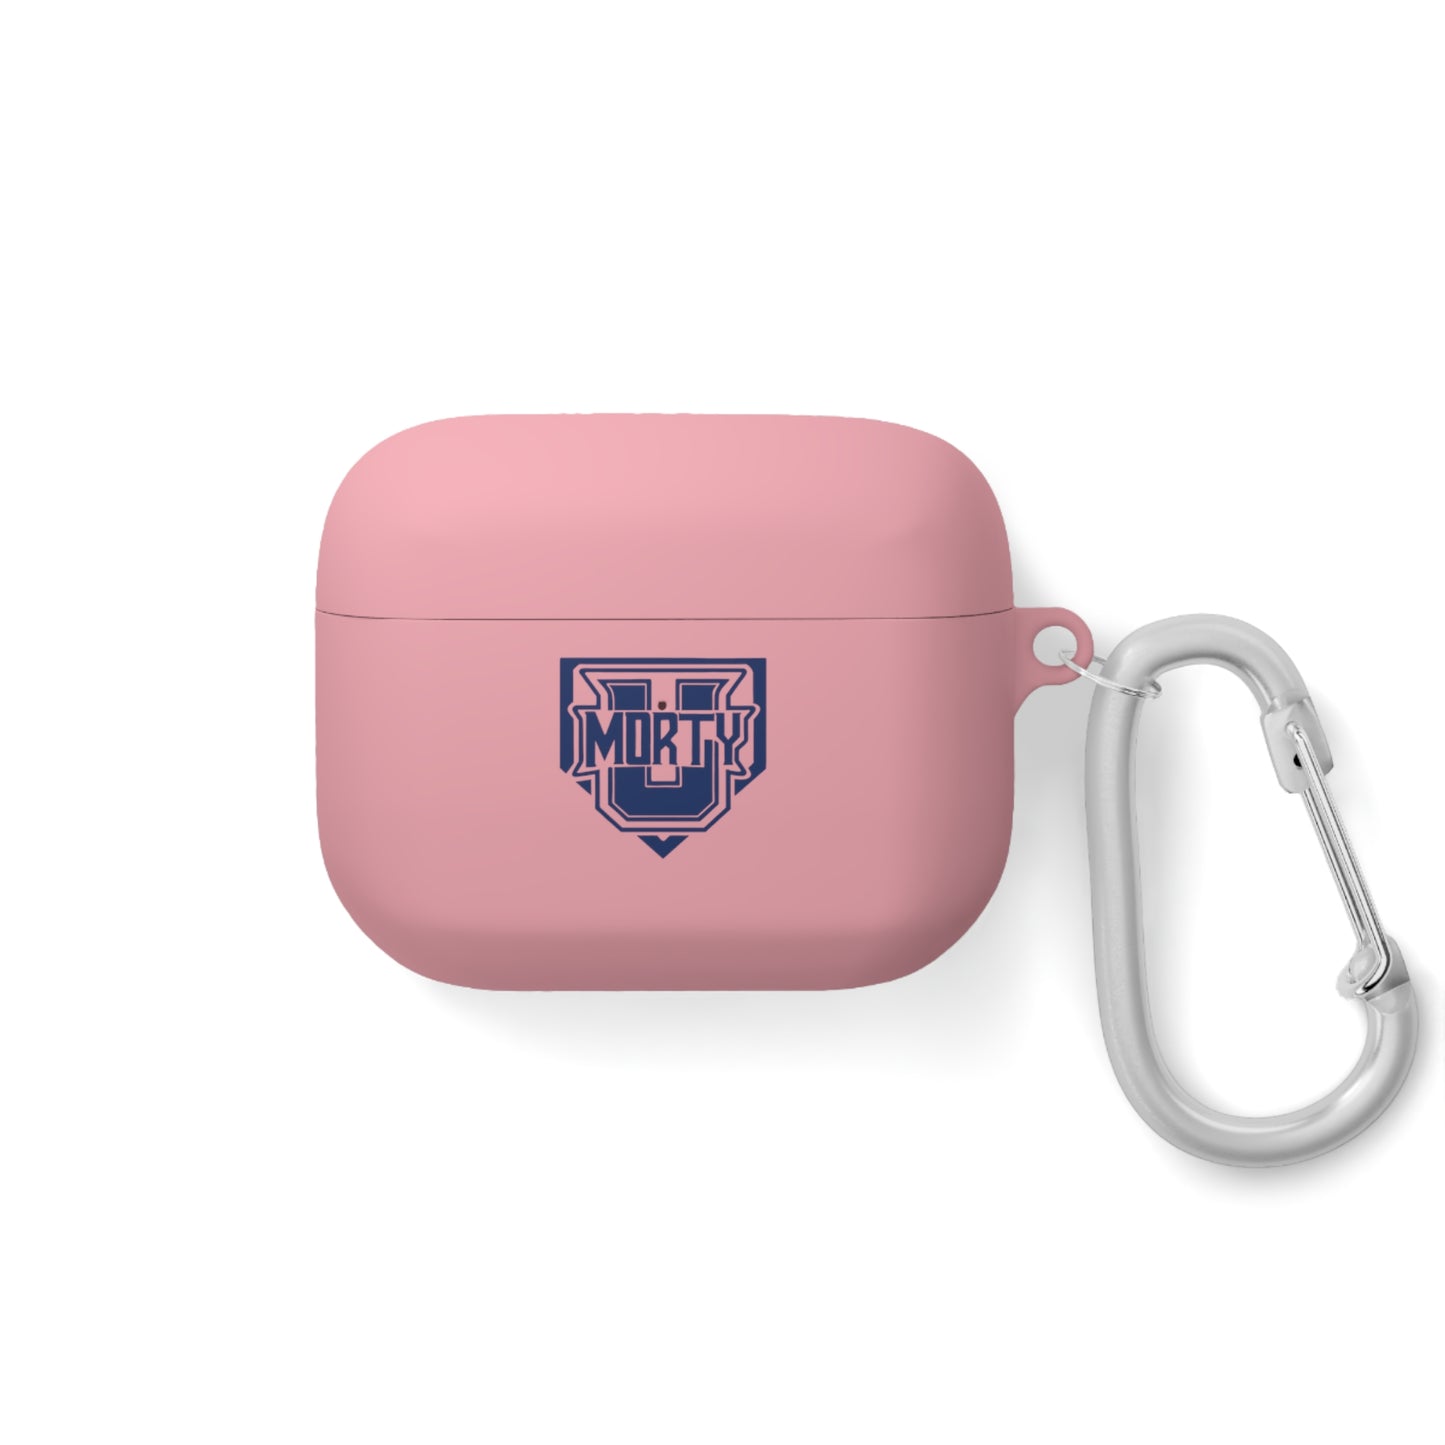 UMorty AirPods and AirPods Pro Case Cover (with design on both sides)